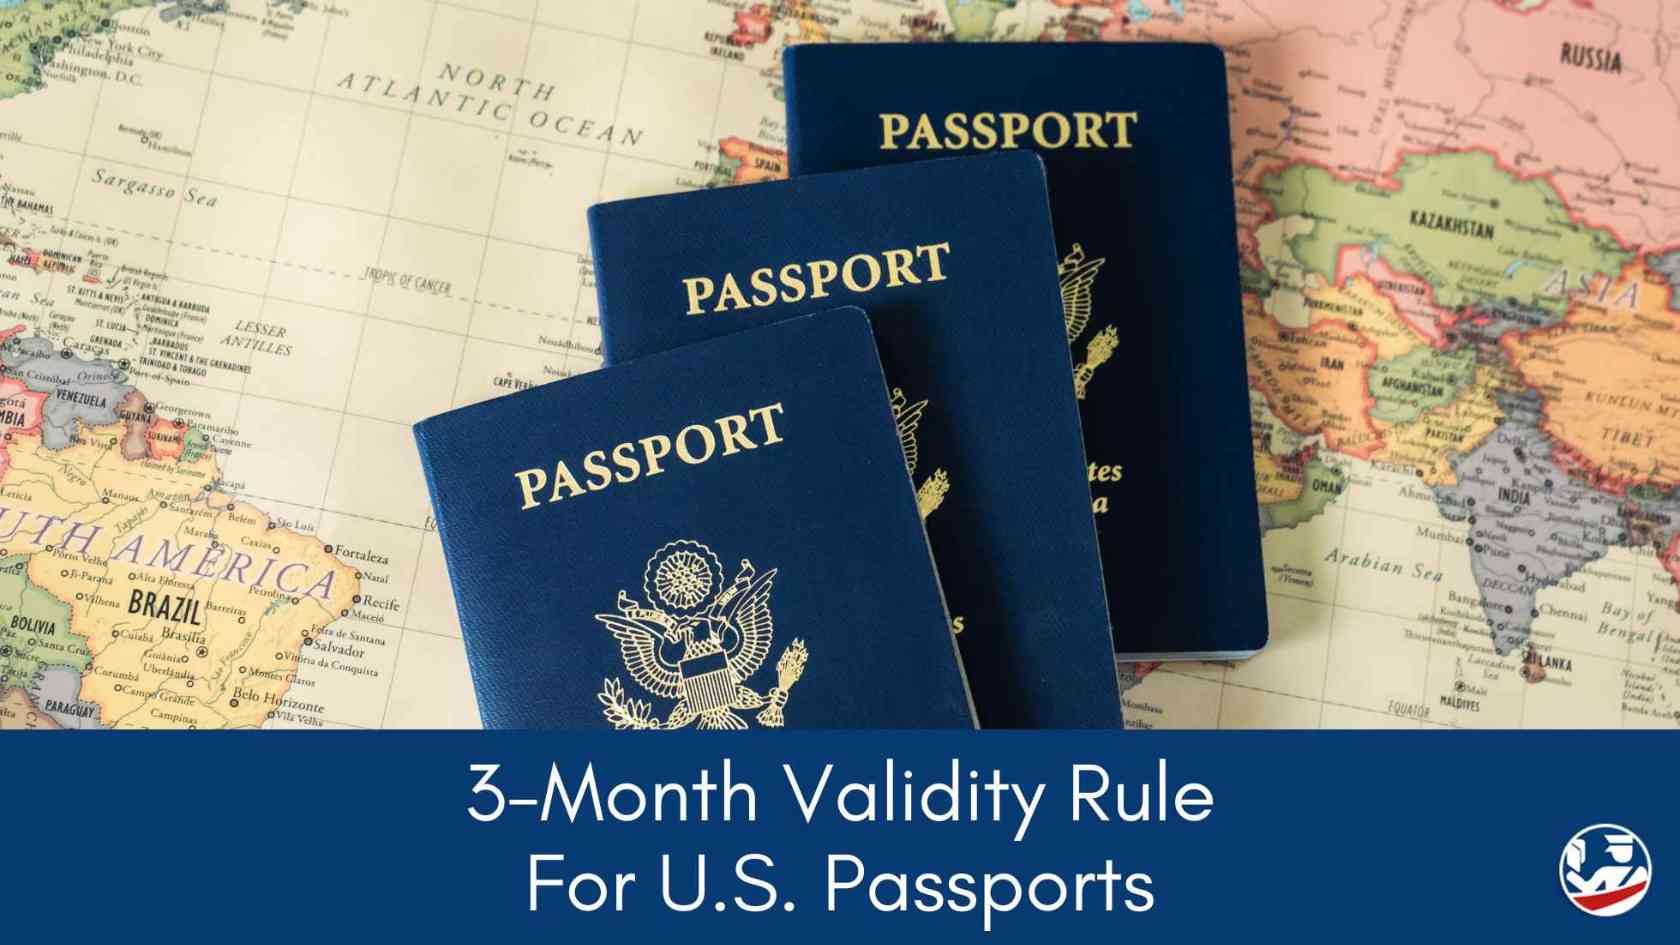 3 month validity rule for US passports.